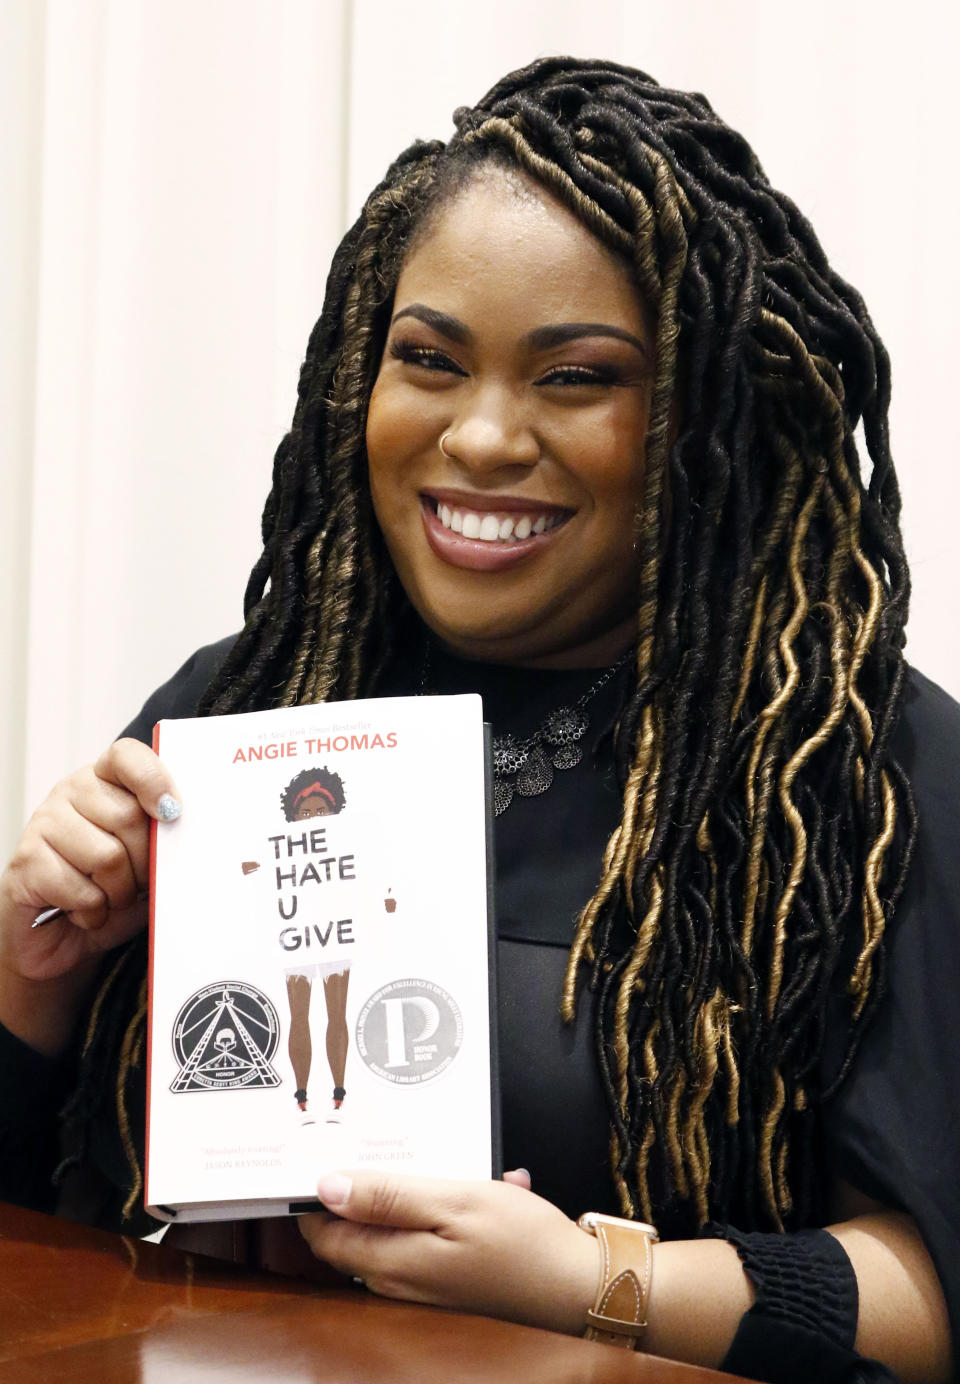 FILE - In this Oct. 10, 2018 photograph, author Angie Thomas holds a copy of her novel, "The Hate U Give," at a book signing in Jackson, Miss. Thomas' best-selling novel about a black teen murdered by police was adapted into a feature film of the same name. (AP Photo/Rogelio V. Solis, File)